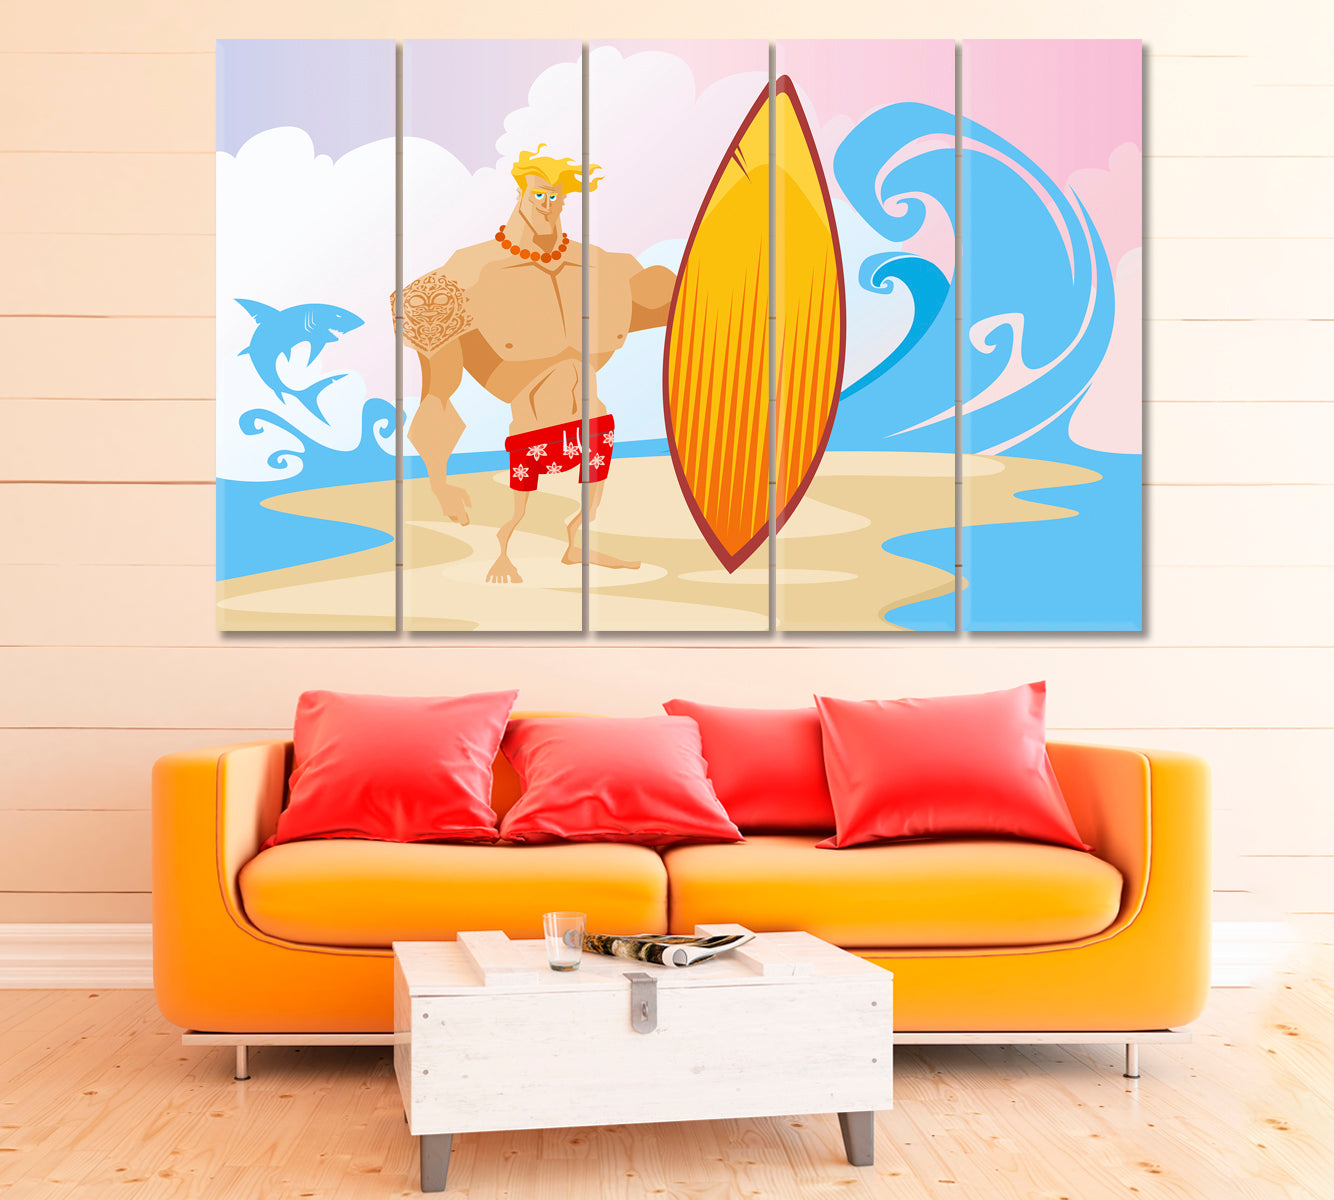 Surfer Canvas Print ArtLexy 5 Panels 36"x24" inches 